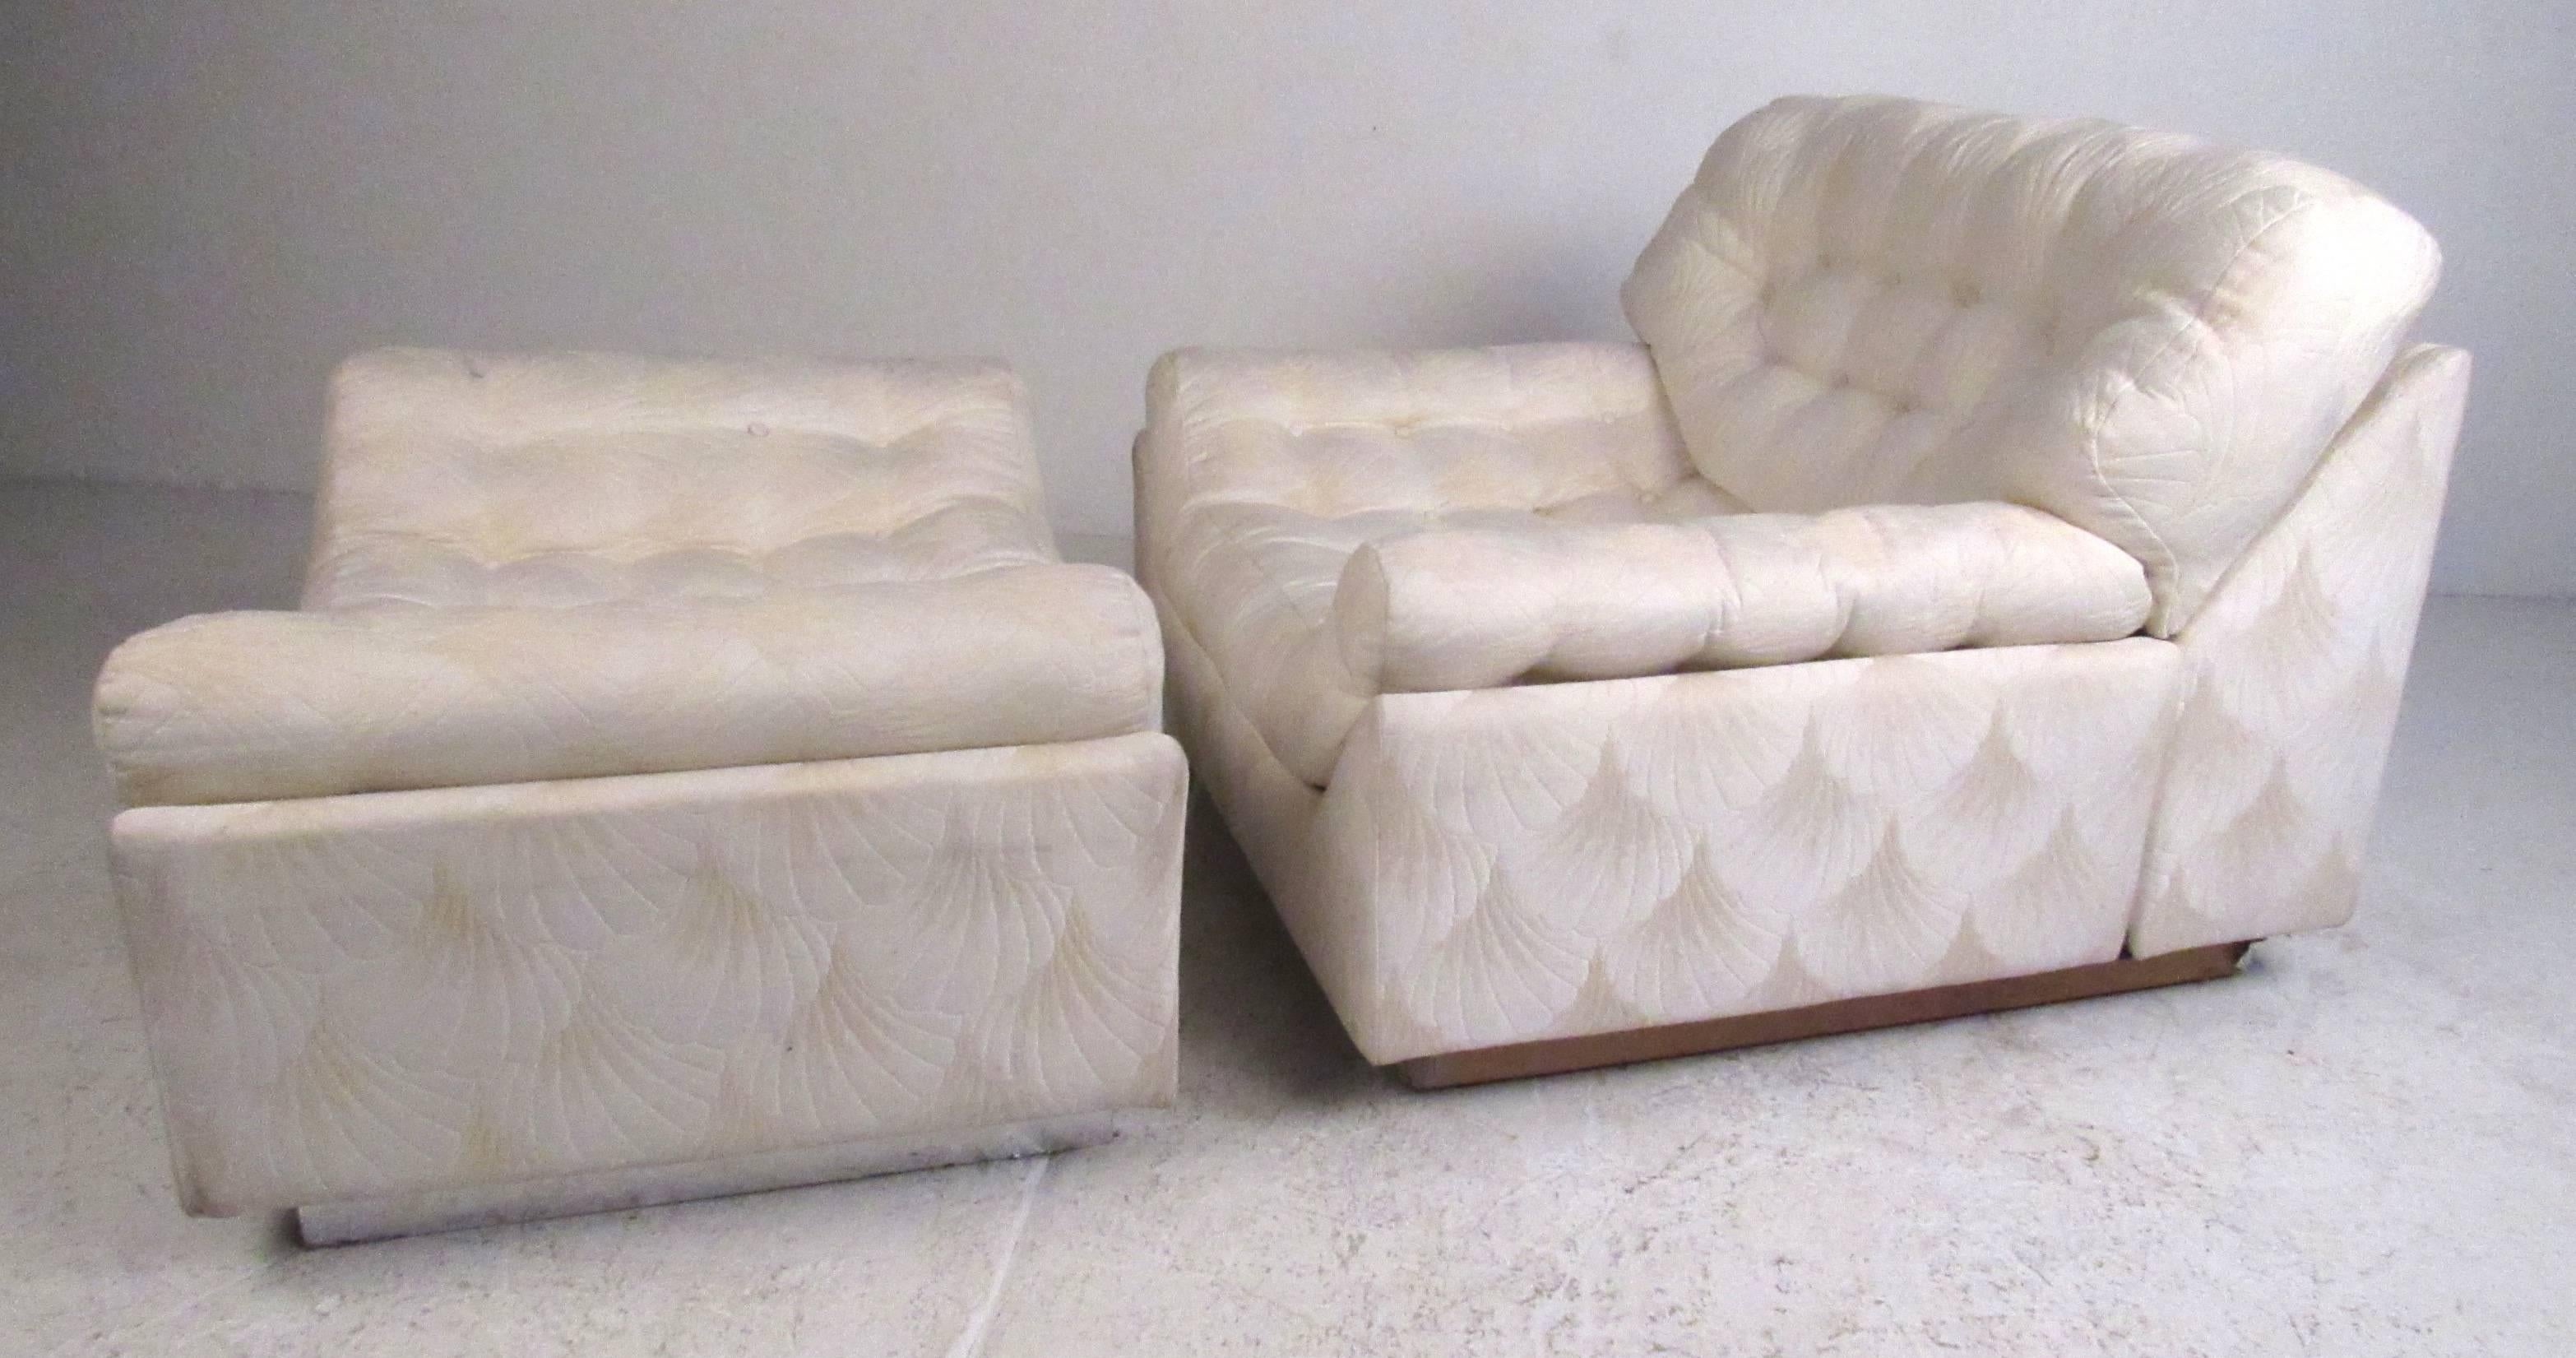 Vintage tufted low slung lounge chair with ottoman by Kane, Inc., custom furniture maker, Baltimore. Please confirm item location (NY or NJ) with dealer.
 